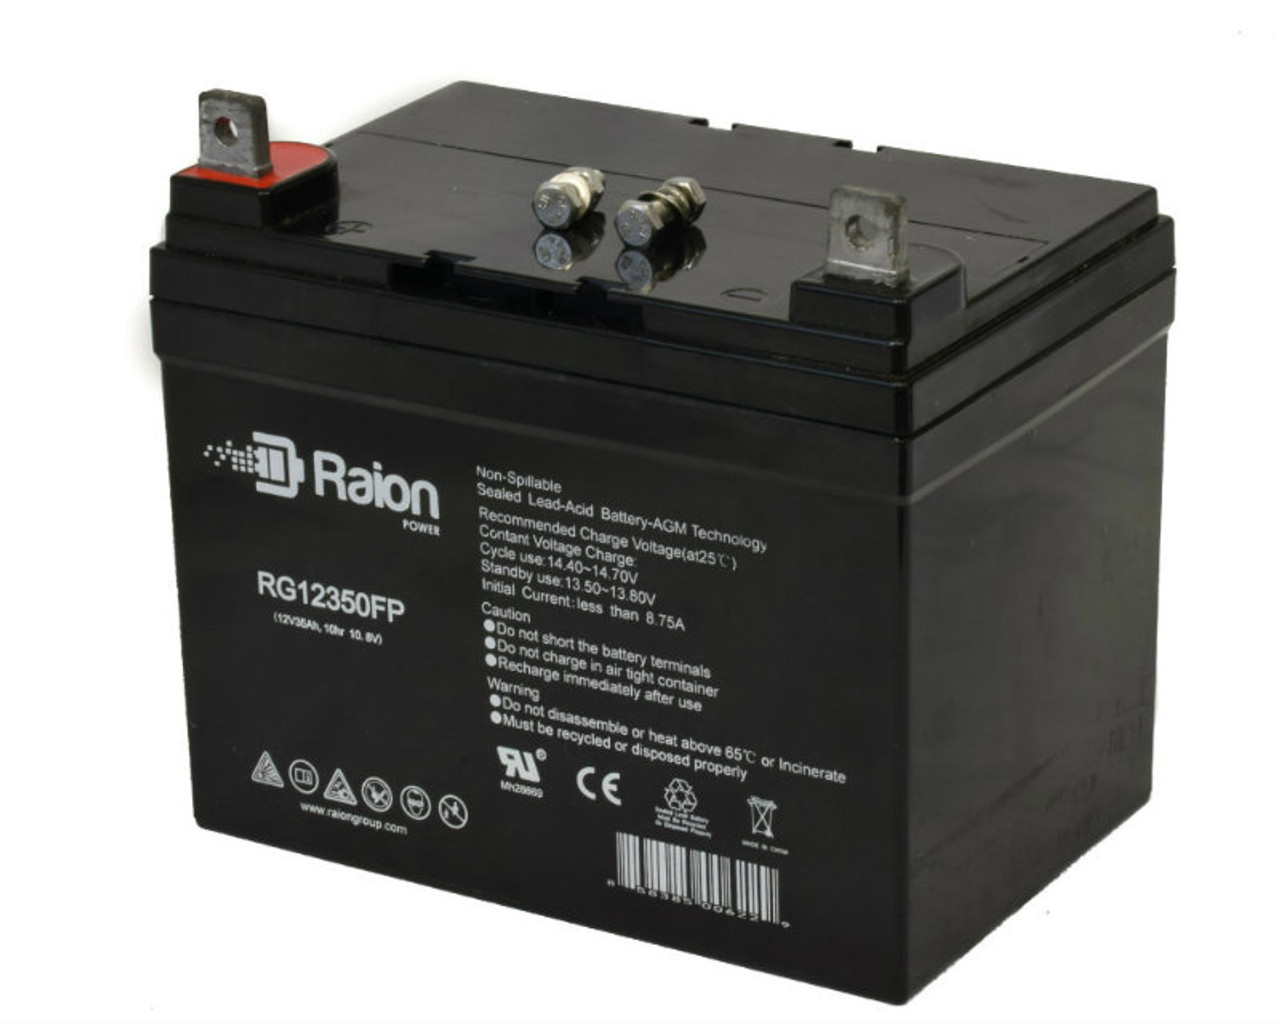 Raion Power Replacement 12V 35Ah RG12350FP Battery for Poulan PP1844